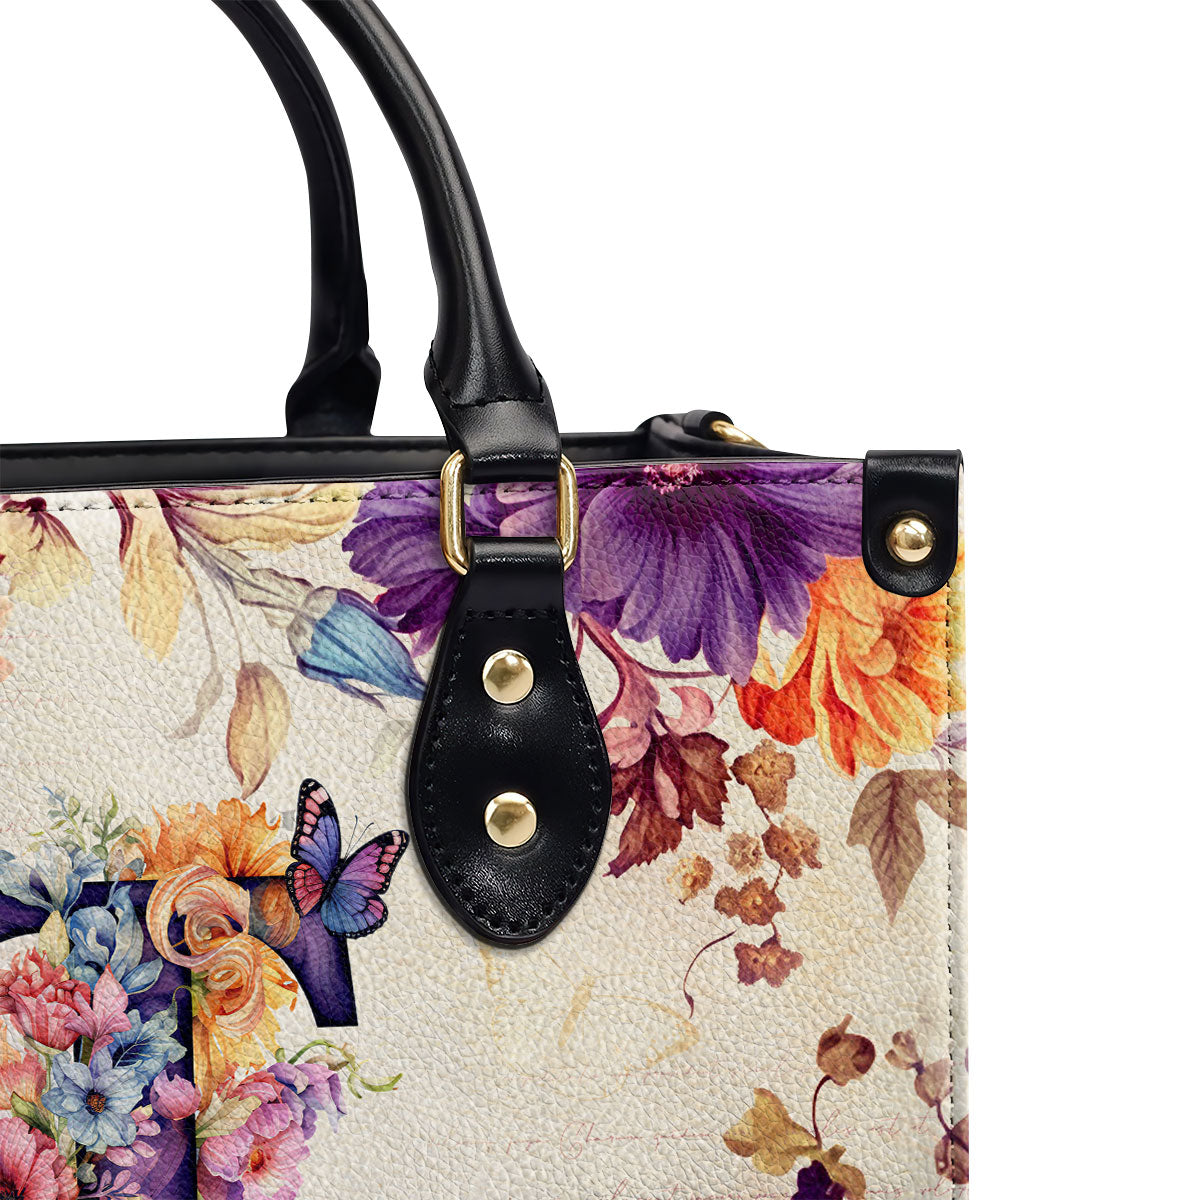 Floral Initial Letter - Personalized Leather Handbag MS98